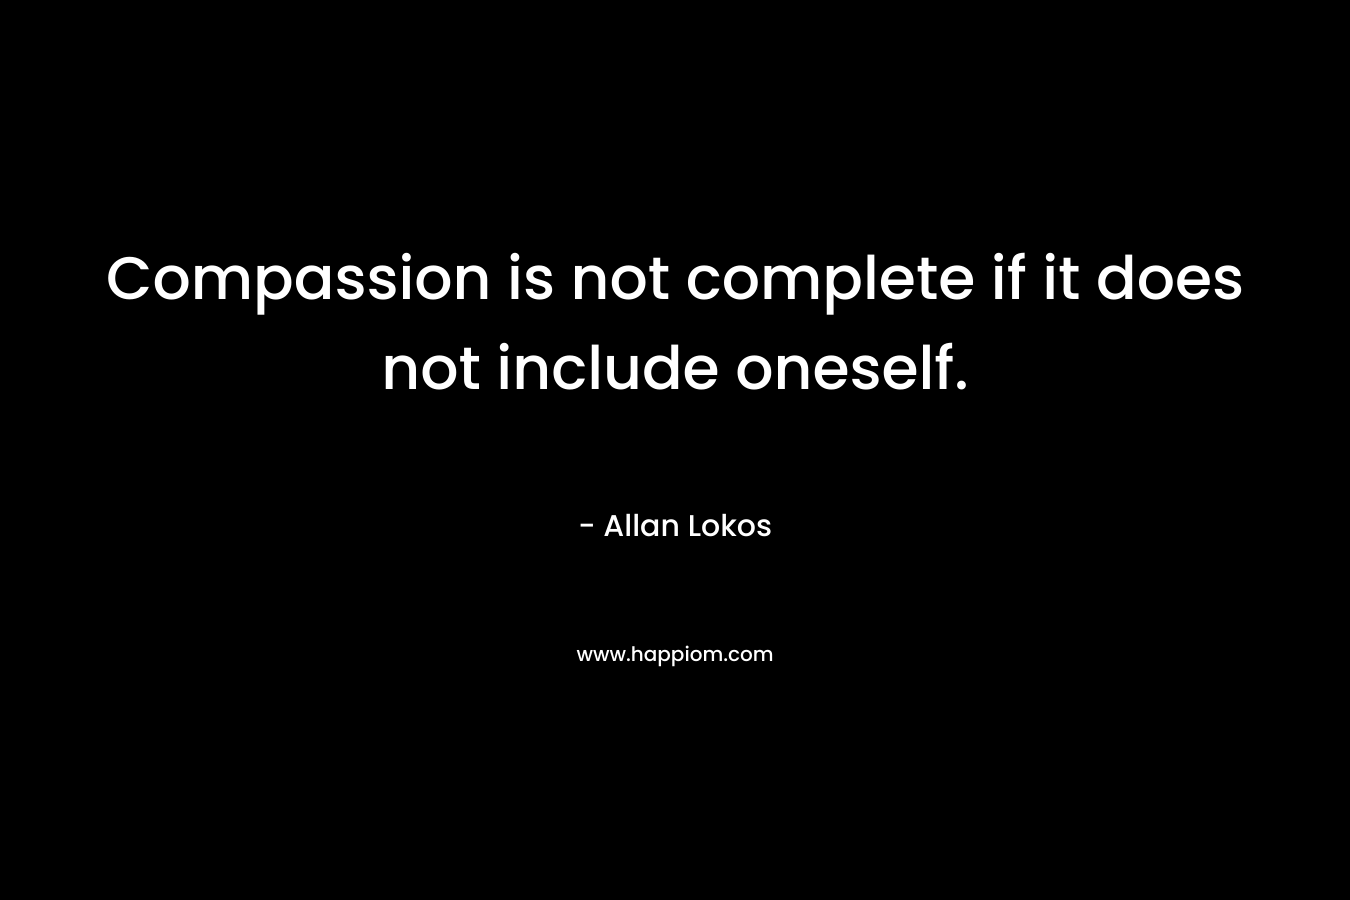 Compassion is not complete if it does not include oneself.